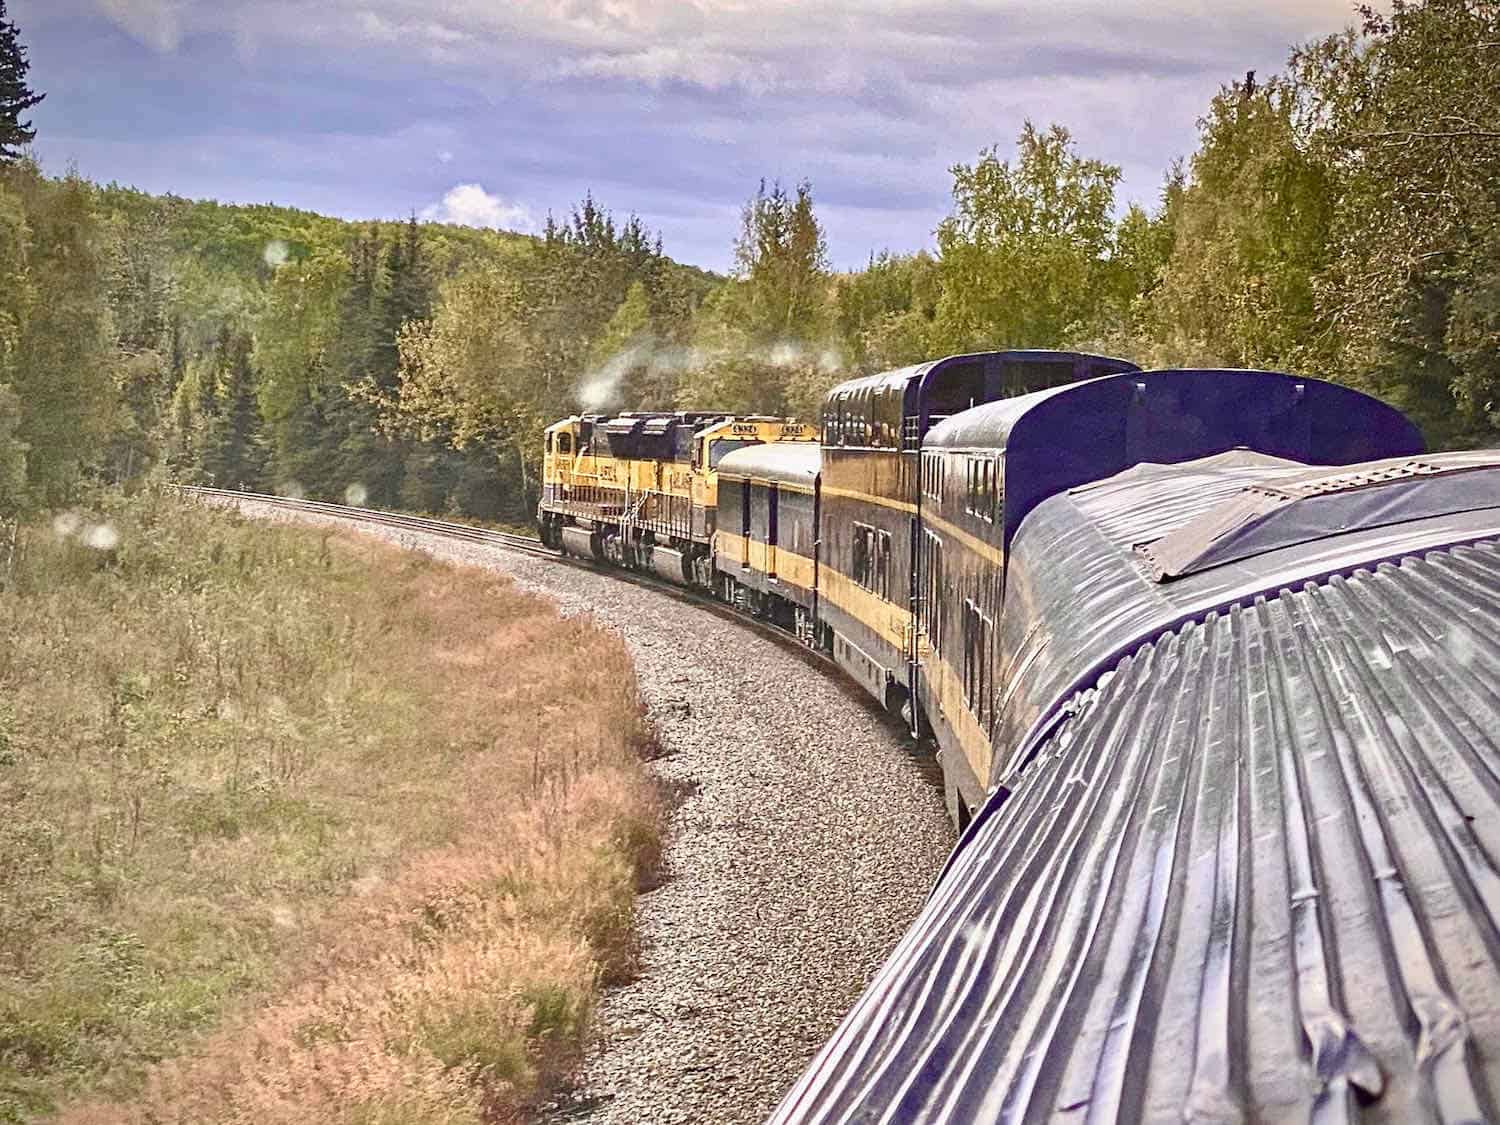 train on the tracks with steam coming from engine